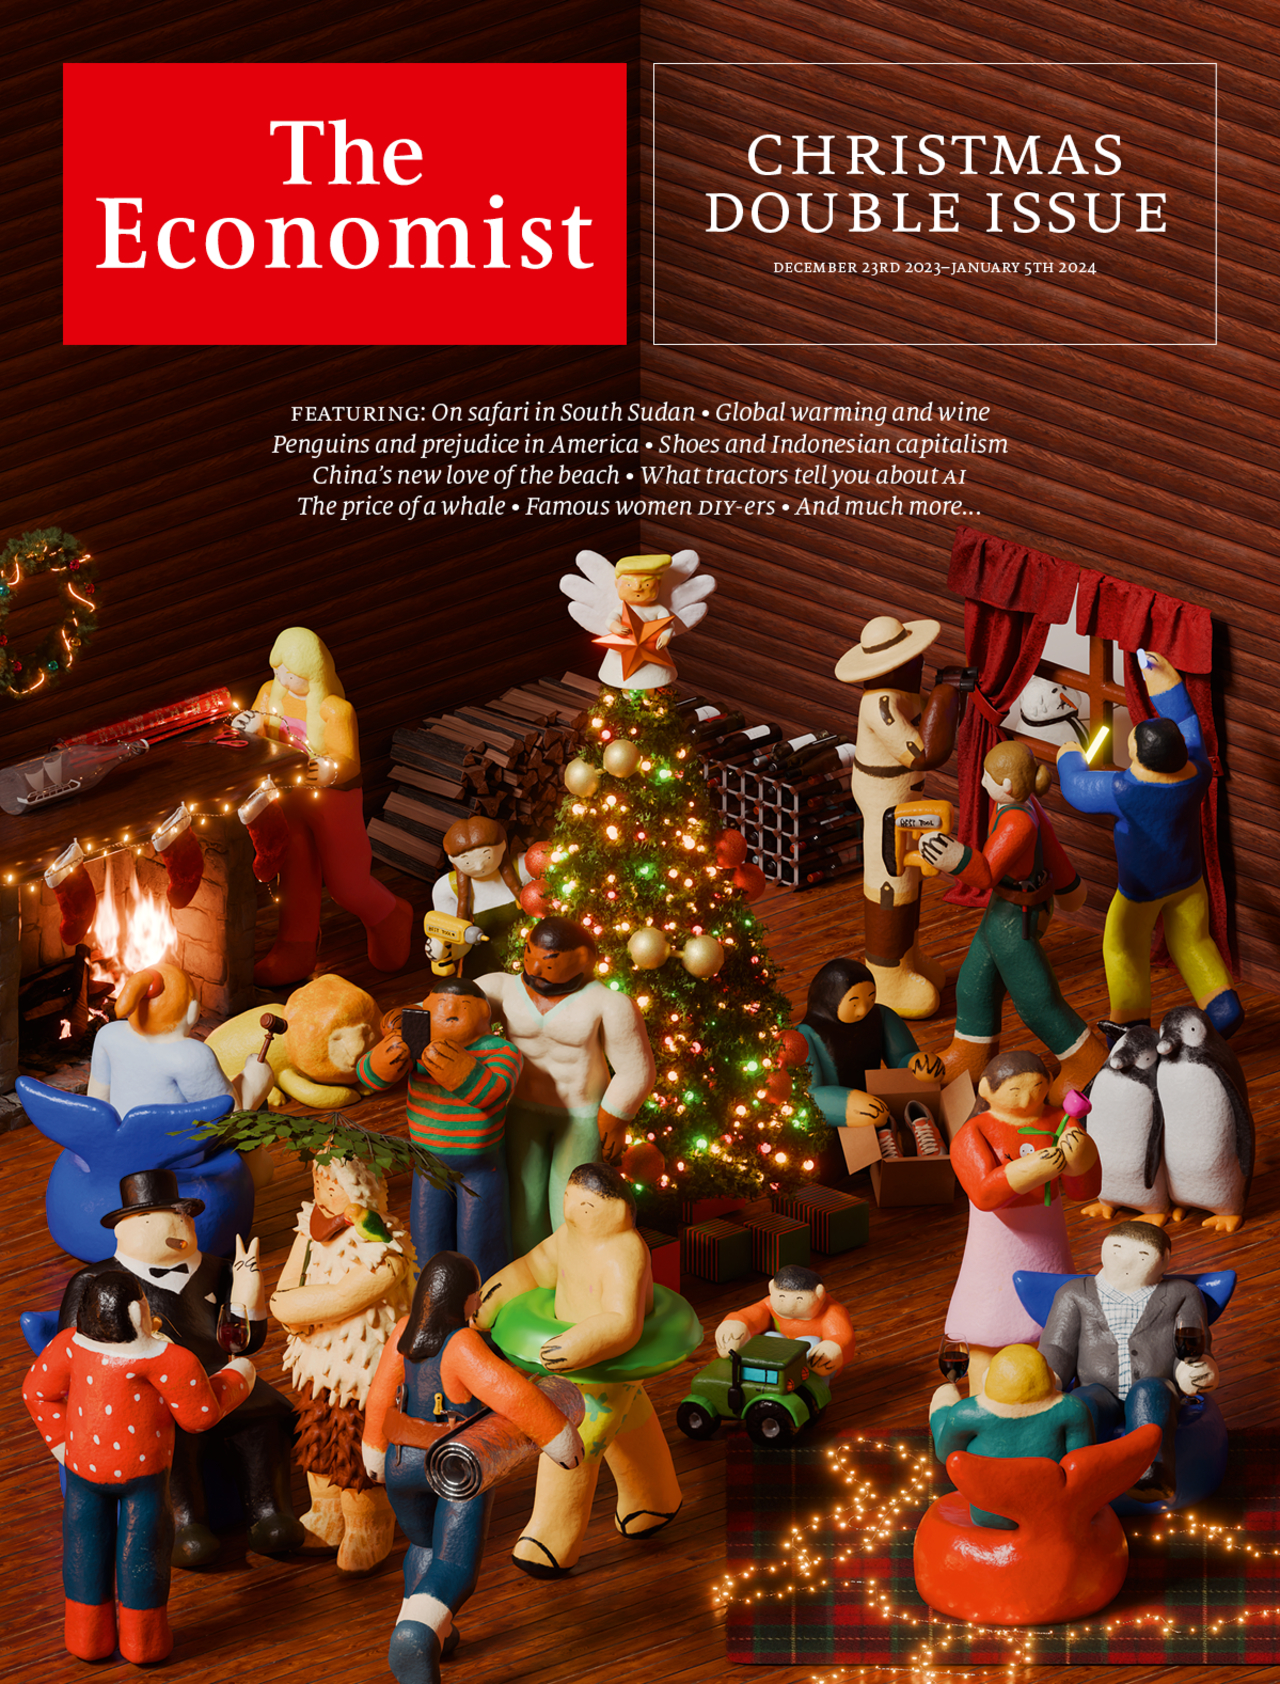 Christmas double issue